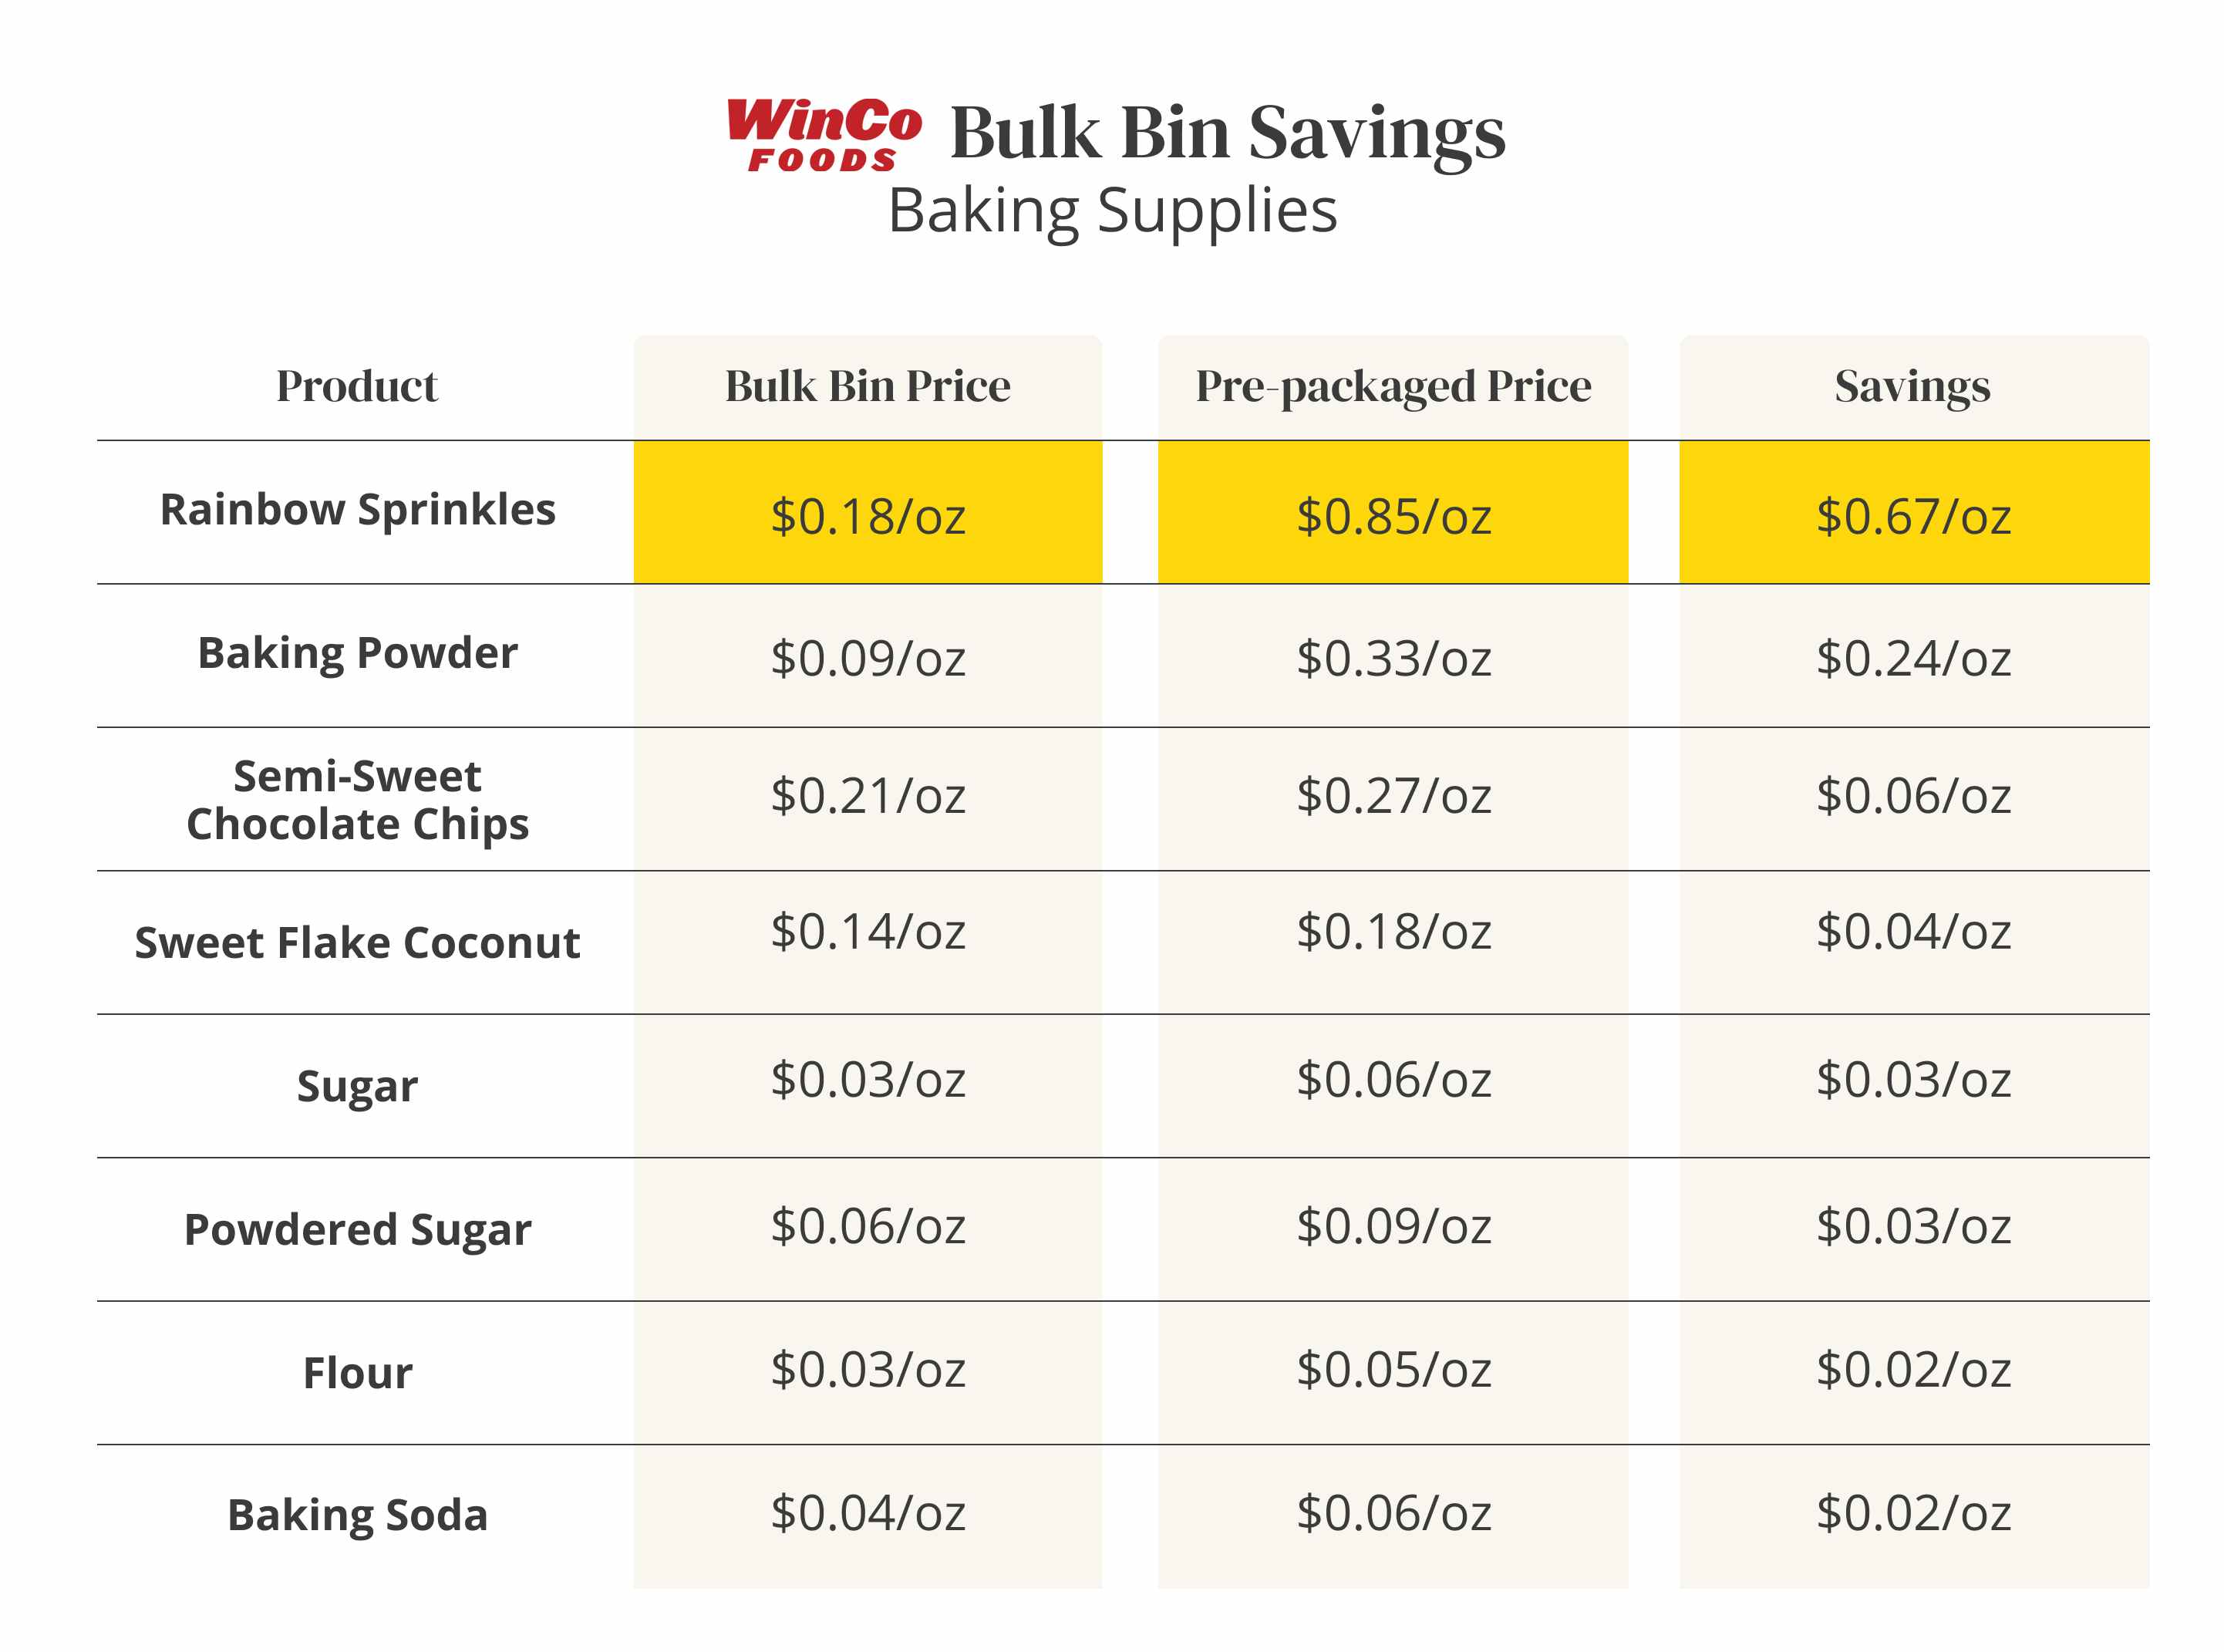 A table comparing prices of bulk food baking supplies to prepackaged items at WinCo